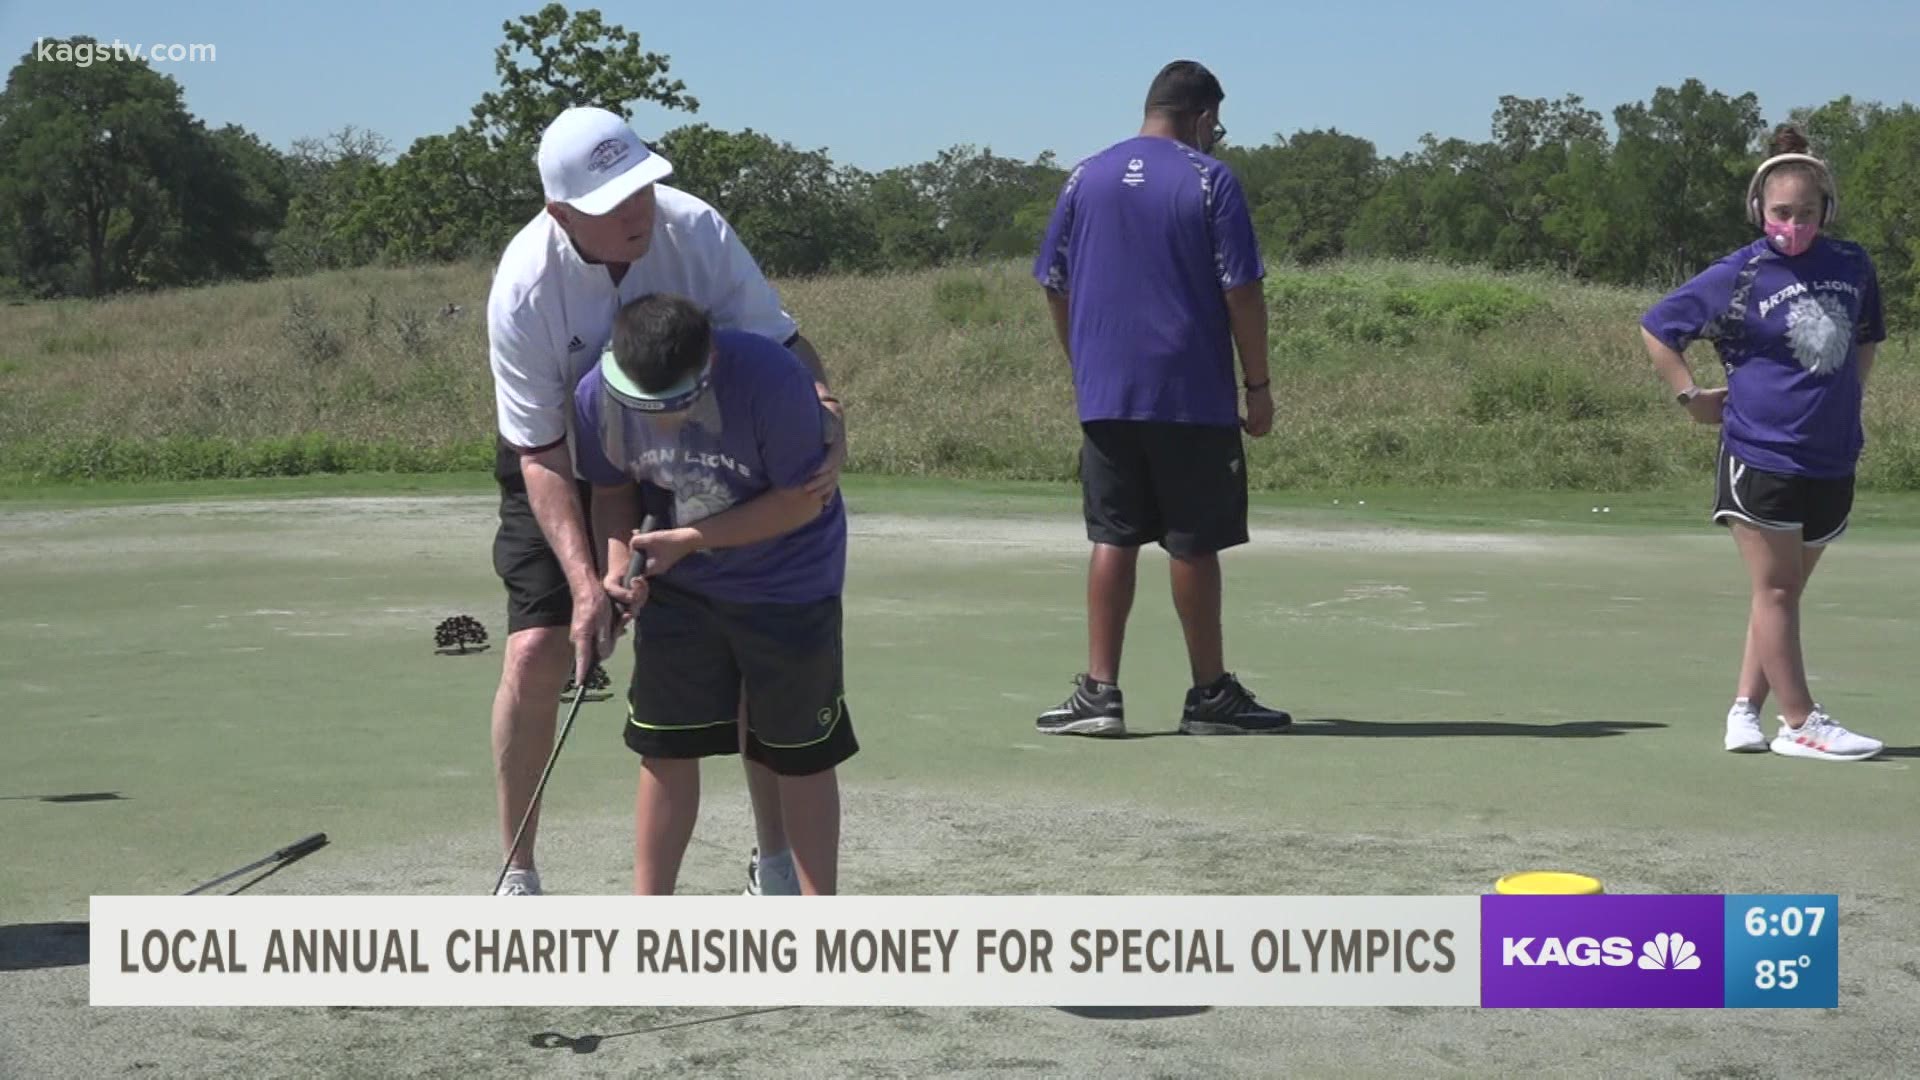 This all-day golf tournament had 62 teams playing this year with almost all proceeds going back to the community.